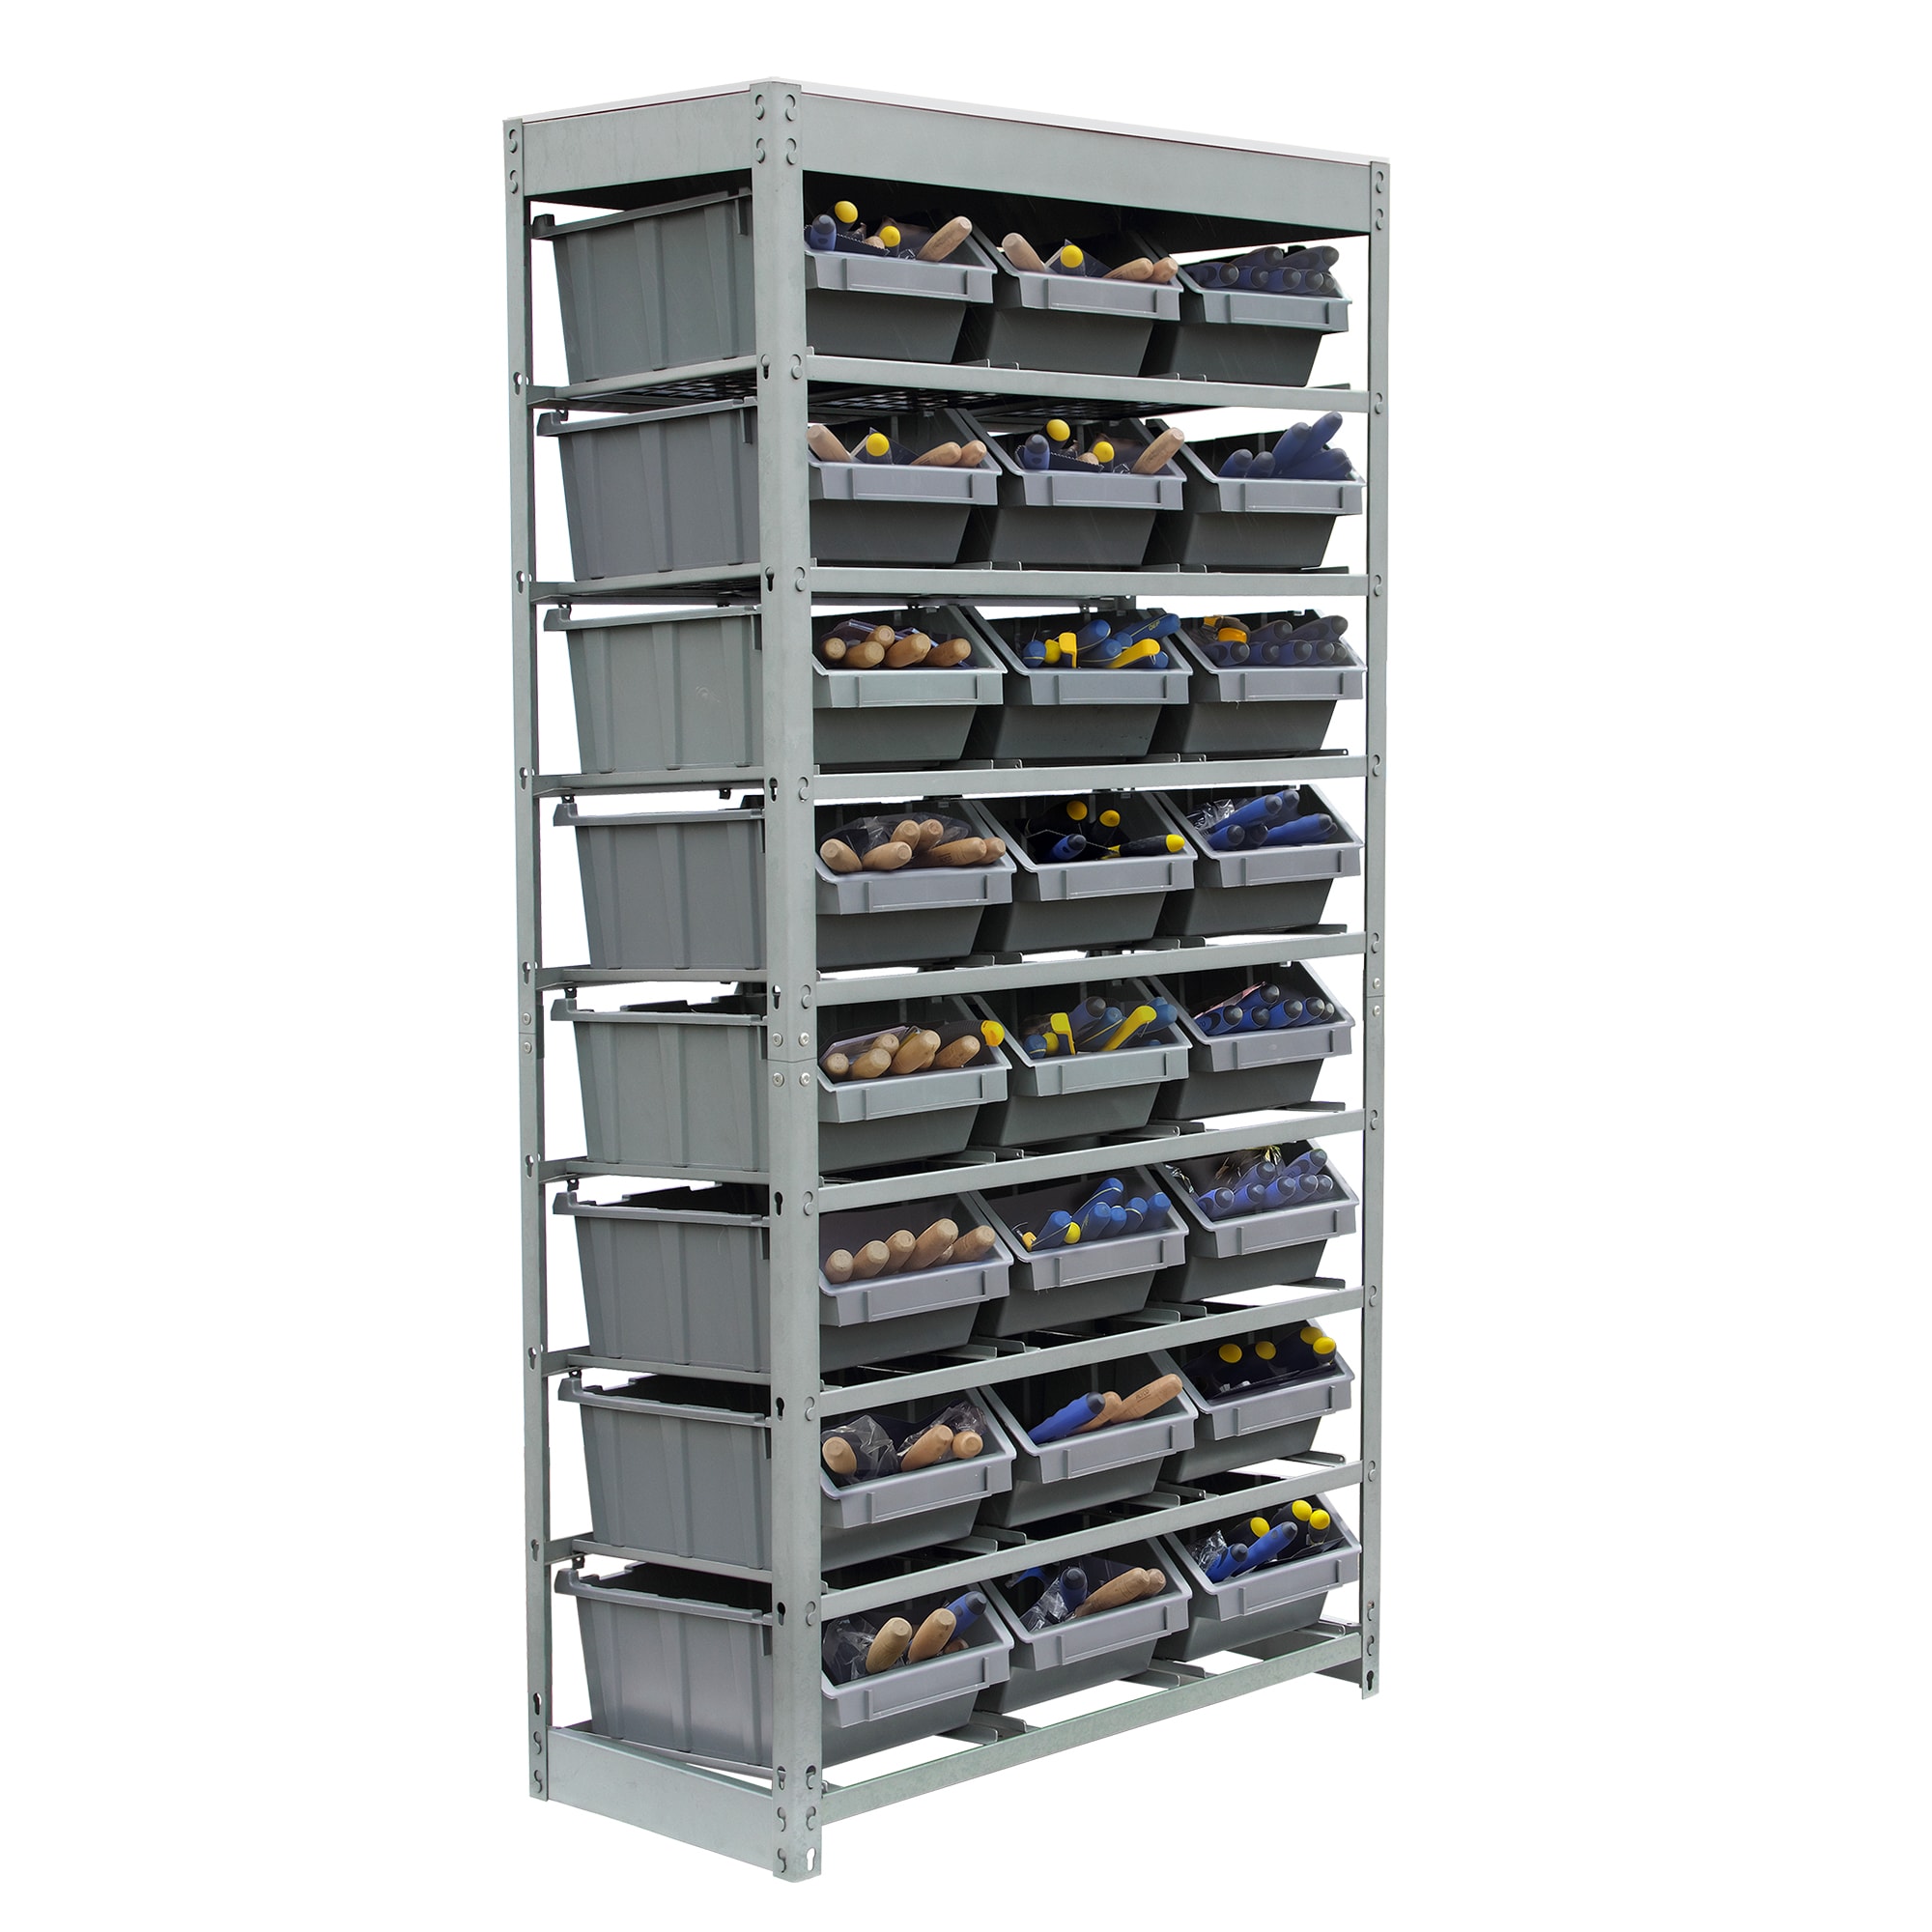 919829051660, bin 35 stand, In all 28 bins in single sided stand, 54 bins  in double sided stand 